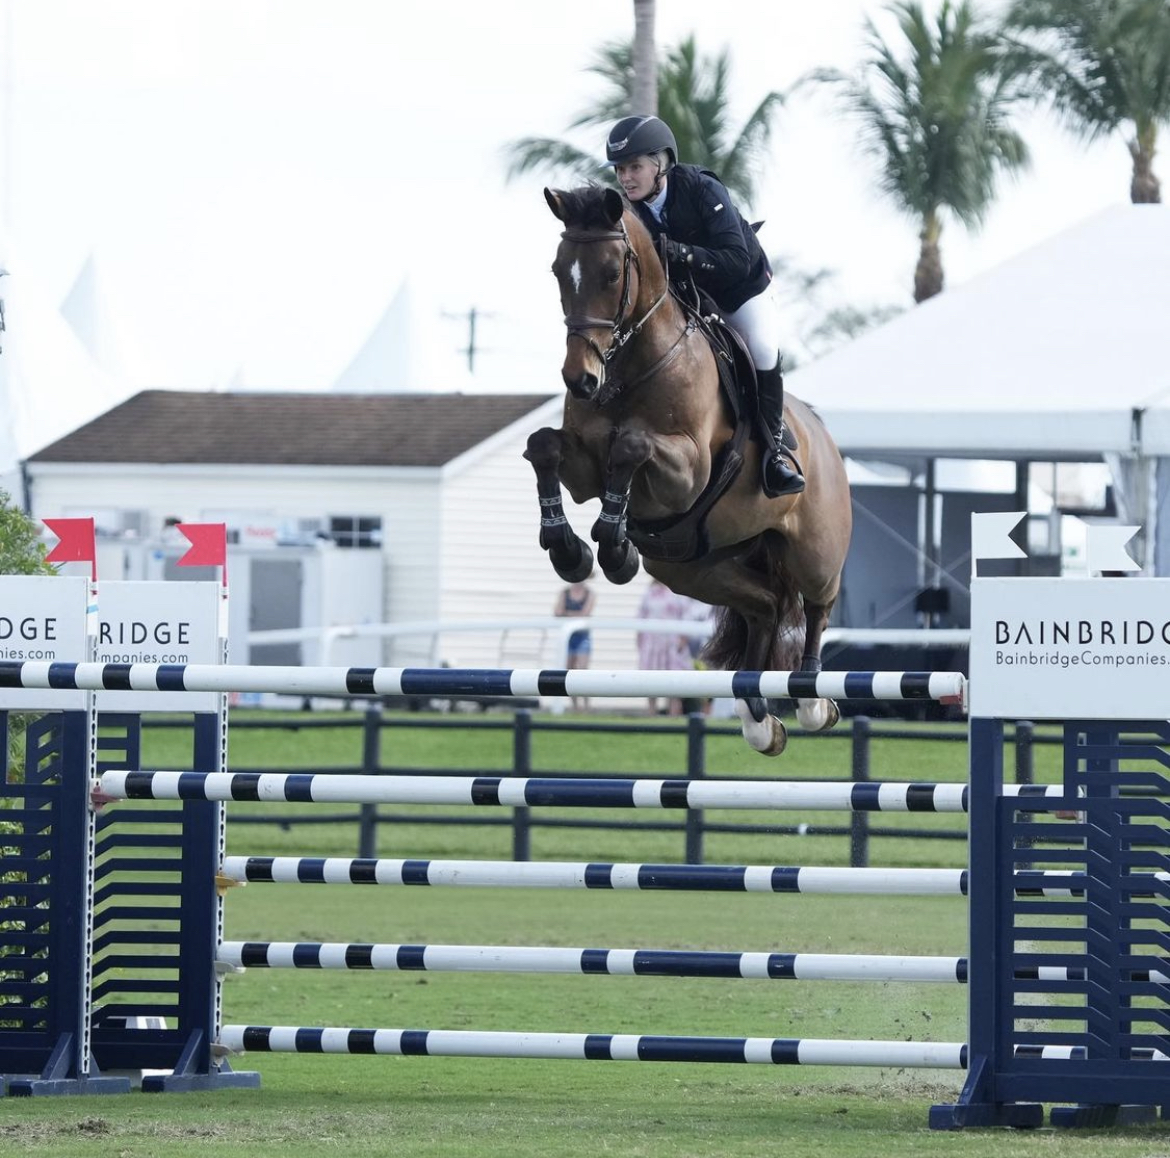 Reference Leal and Carlie Fairty with a podium finish in the BainbridgeCSI3* 1.40m class during WEF 6.